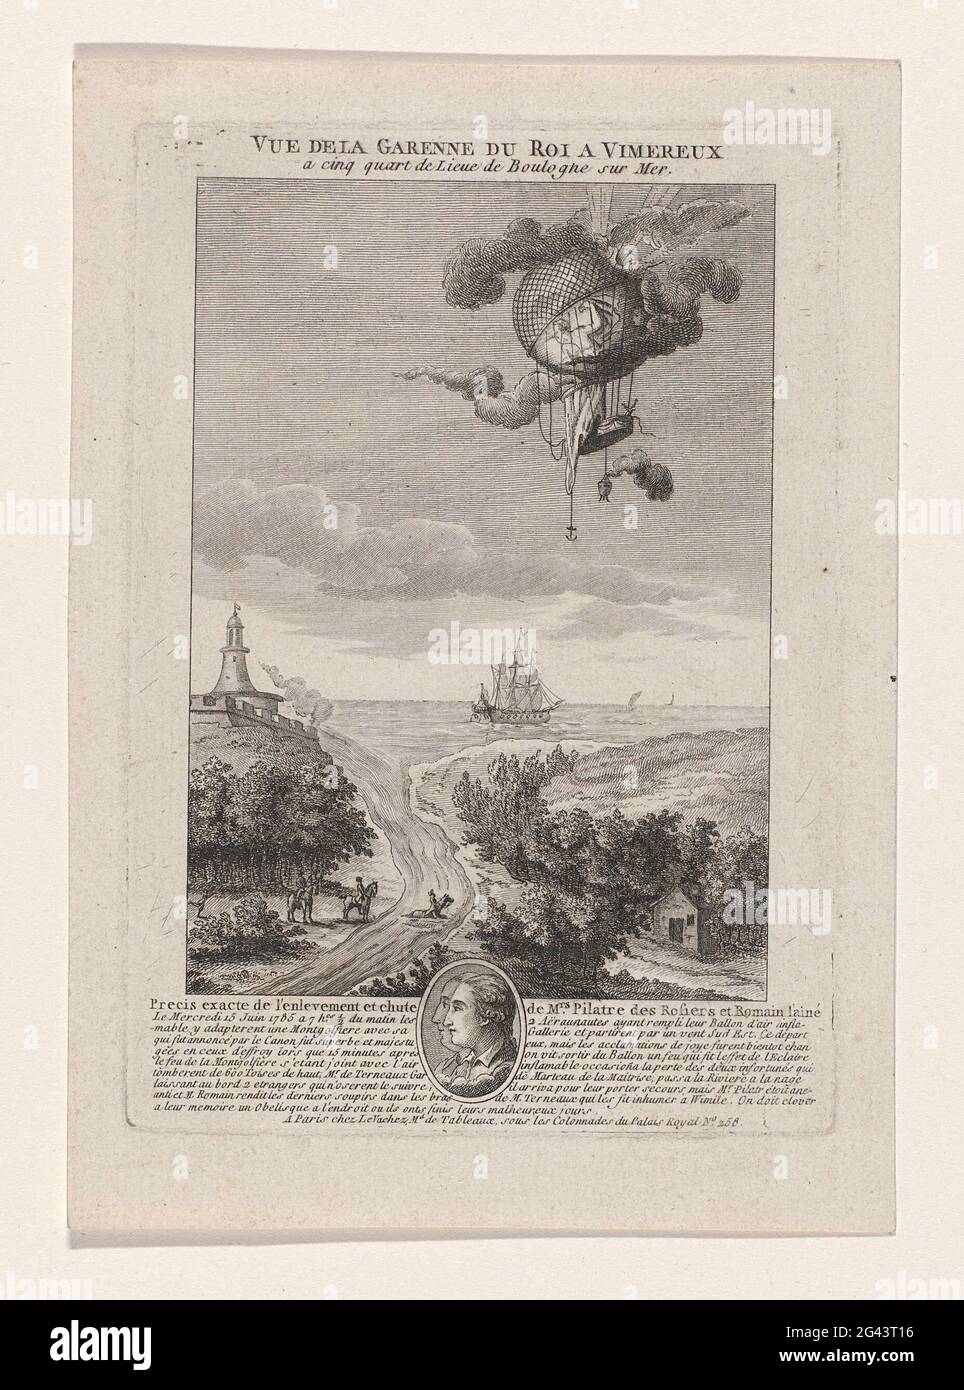 Het VeronGelukken van Een Luchtbalon Bij Garenne of the King You Gimmers; View of the Garenne of the King in Vimeraux five-quarters of Boulogne sur mer - accurate precise of the kidnapping and fall of Mrs Pilare and Rosiers and Romain the elder in 1785.. Stock Photo